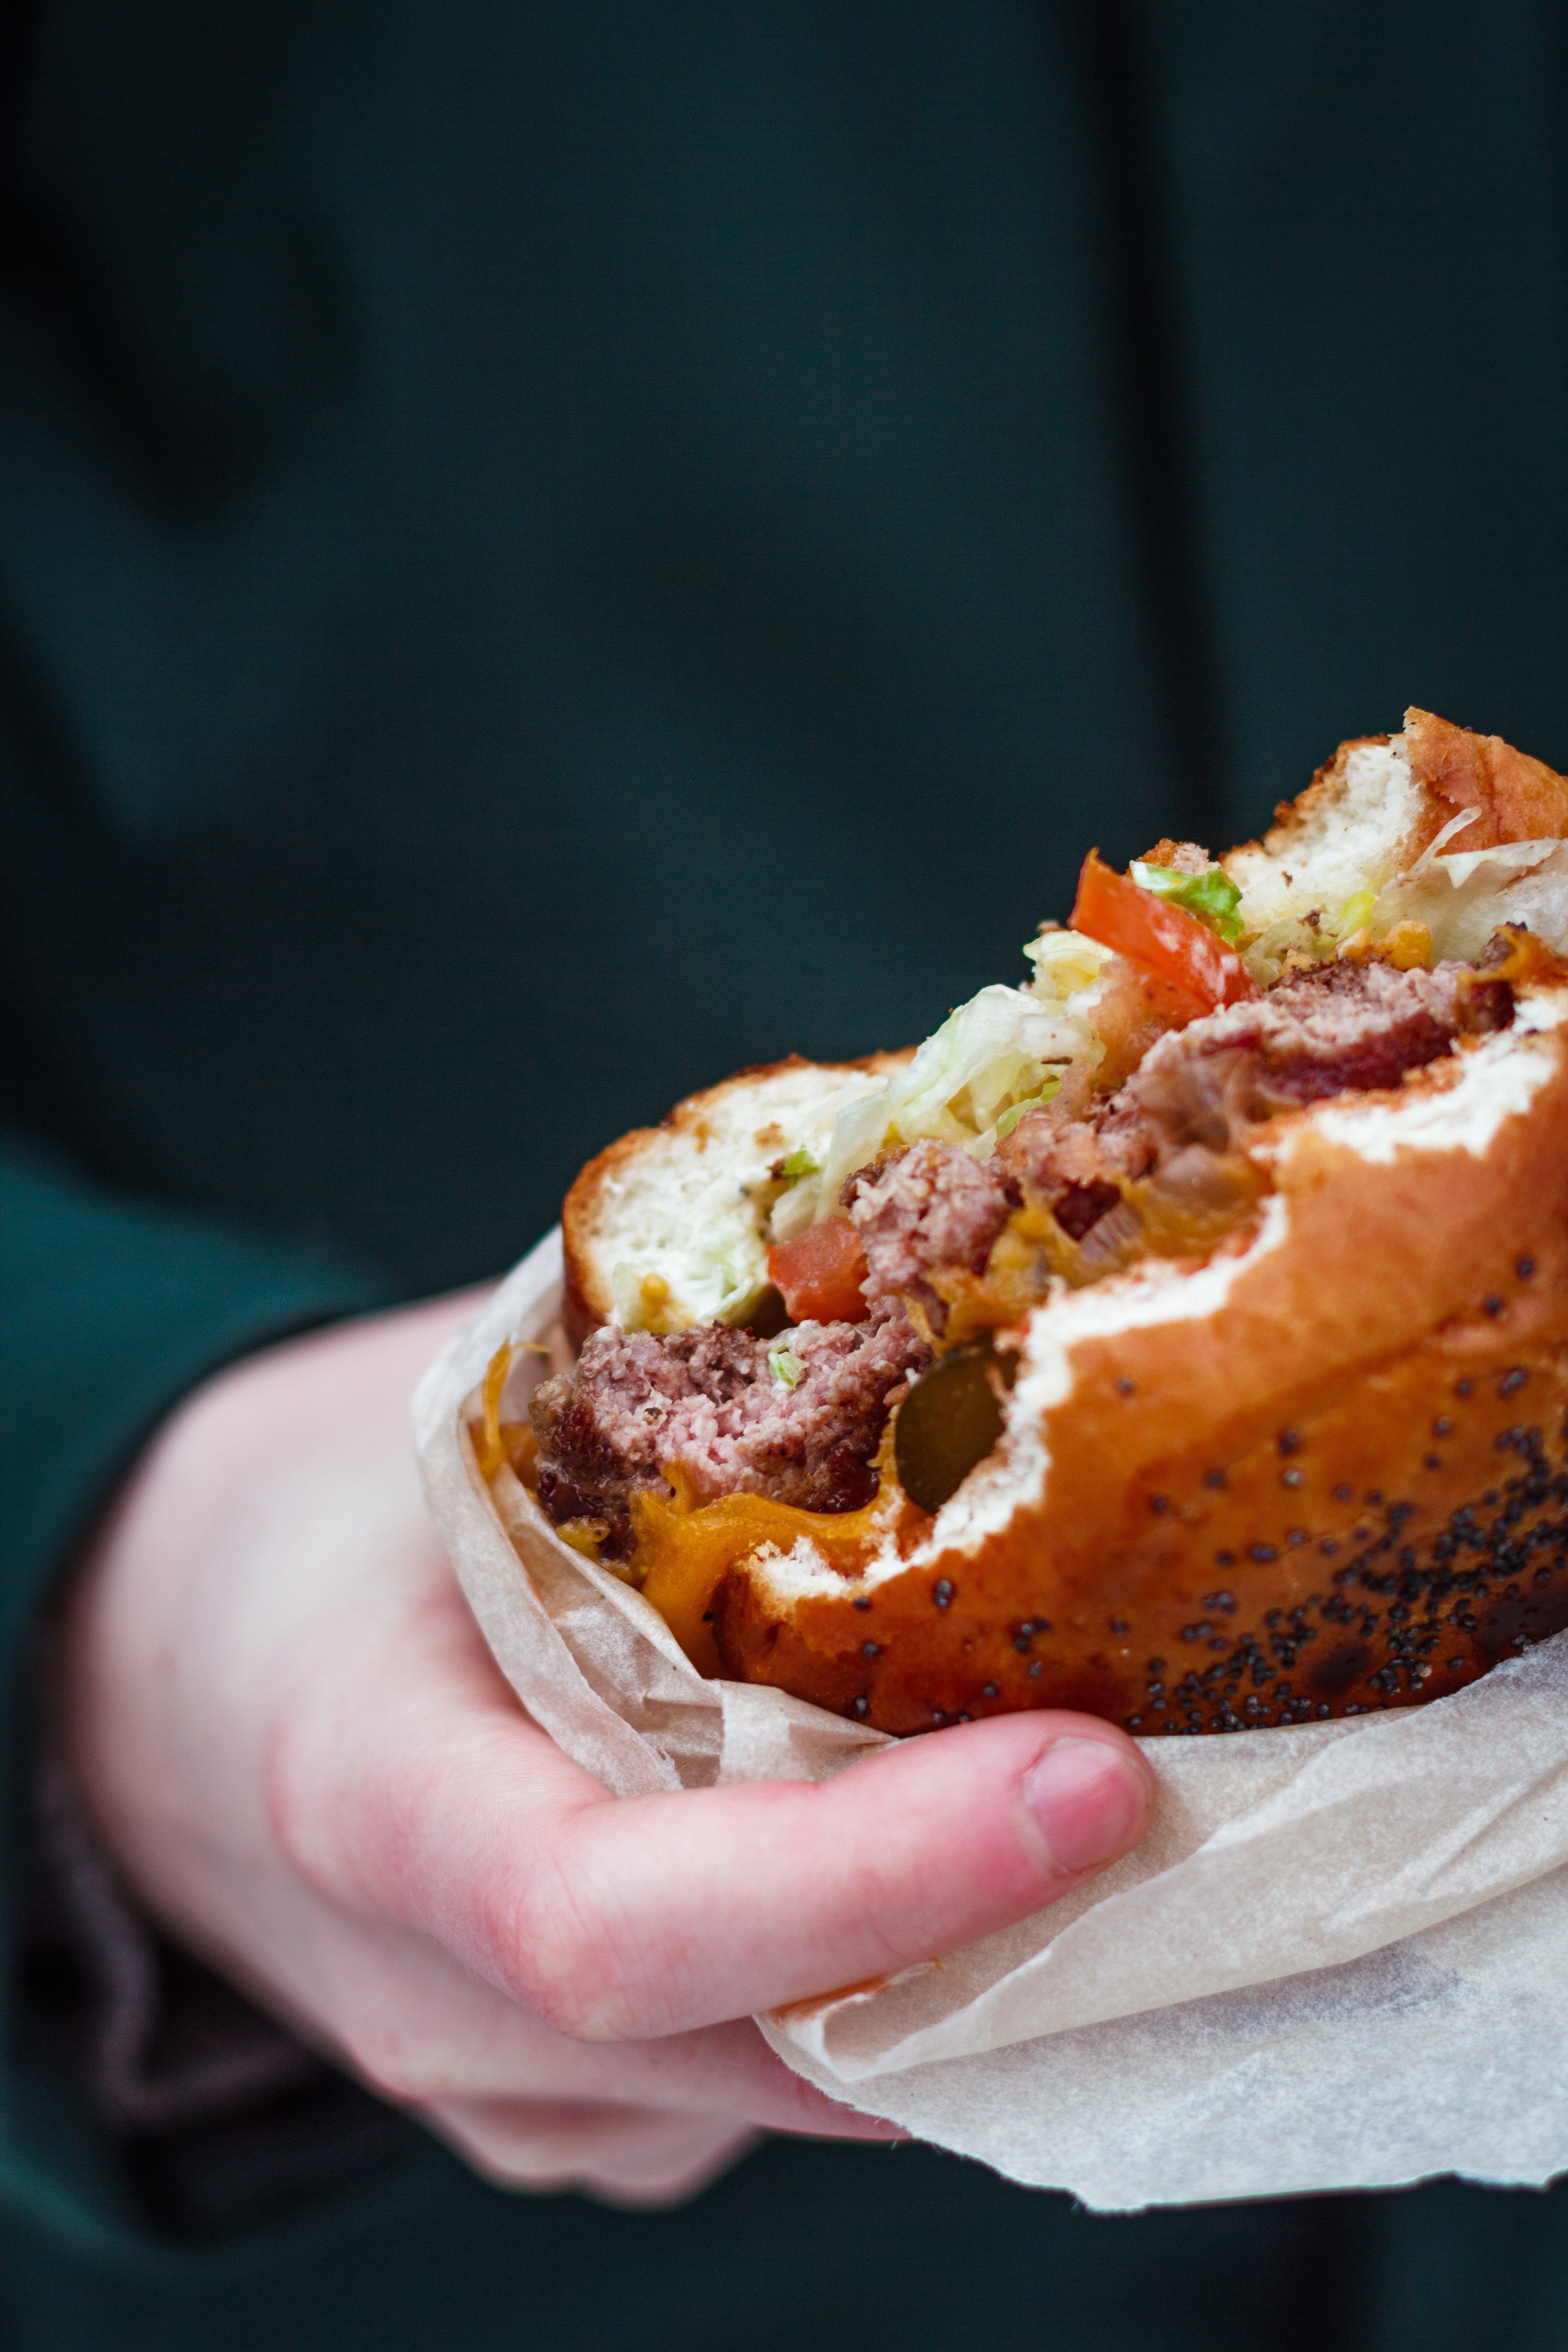 Martin only had a burger with him, which he decided to split into two. | Source: Pexels